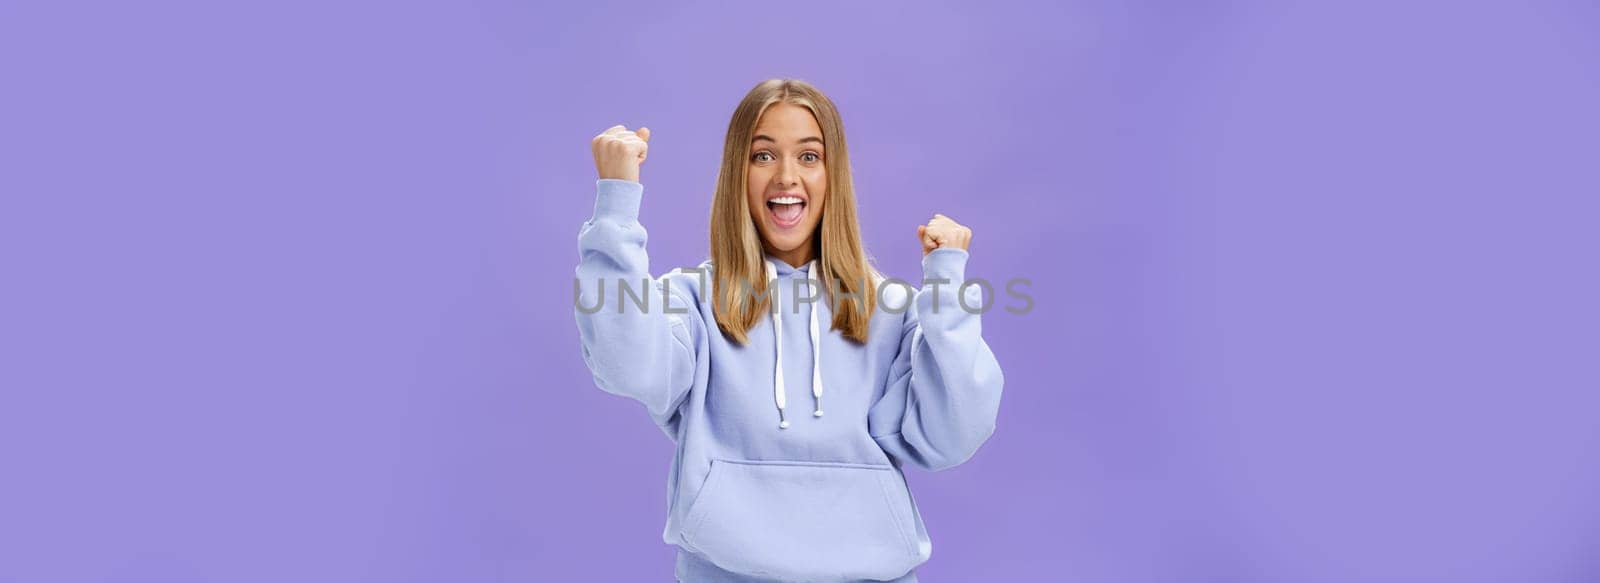 Cheerful happy and supportive young girlfriend with fair hair and tan in warm hoodide raising fists in cheer and triumph smiling saying yeah celebrating goal or success over purple background. Lifestyle.